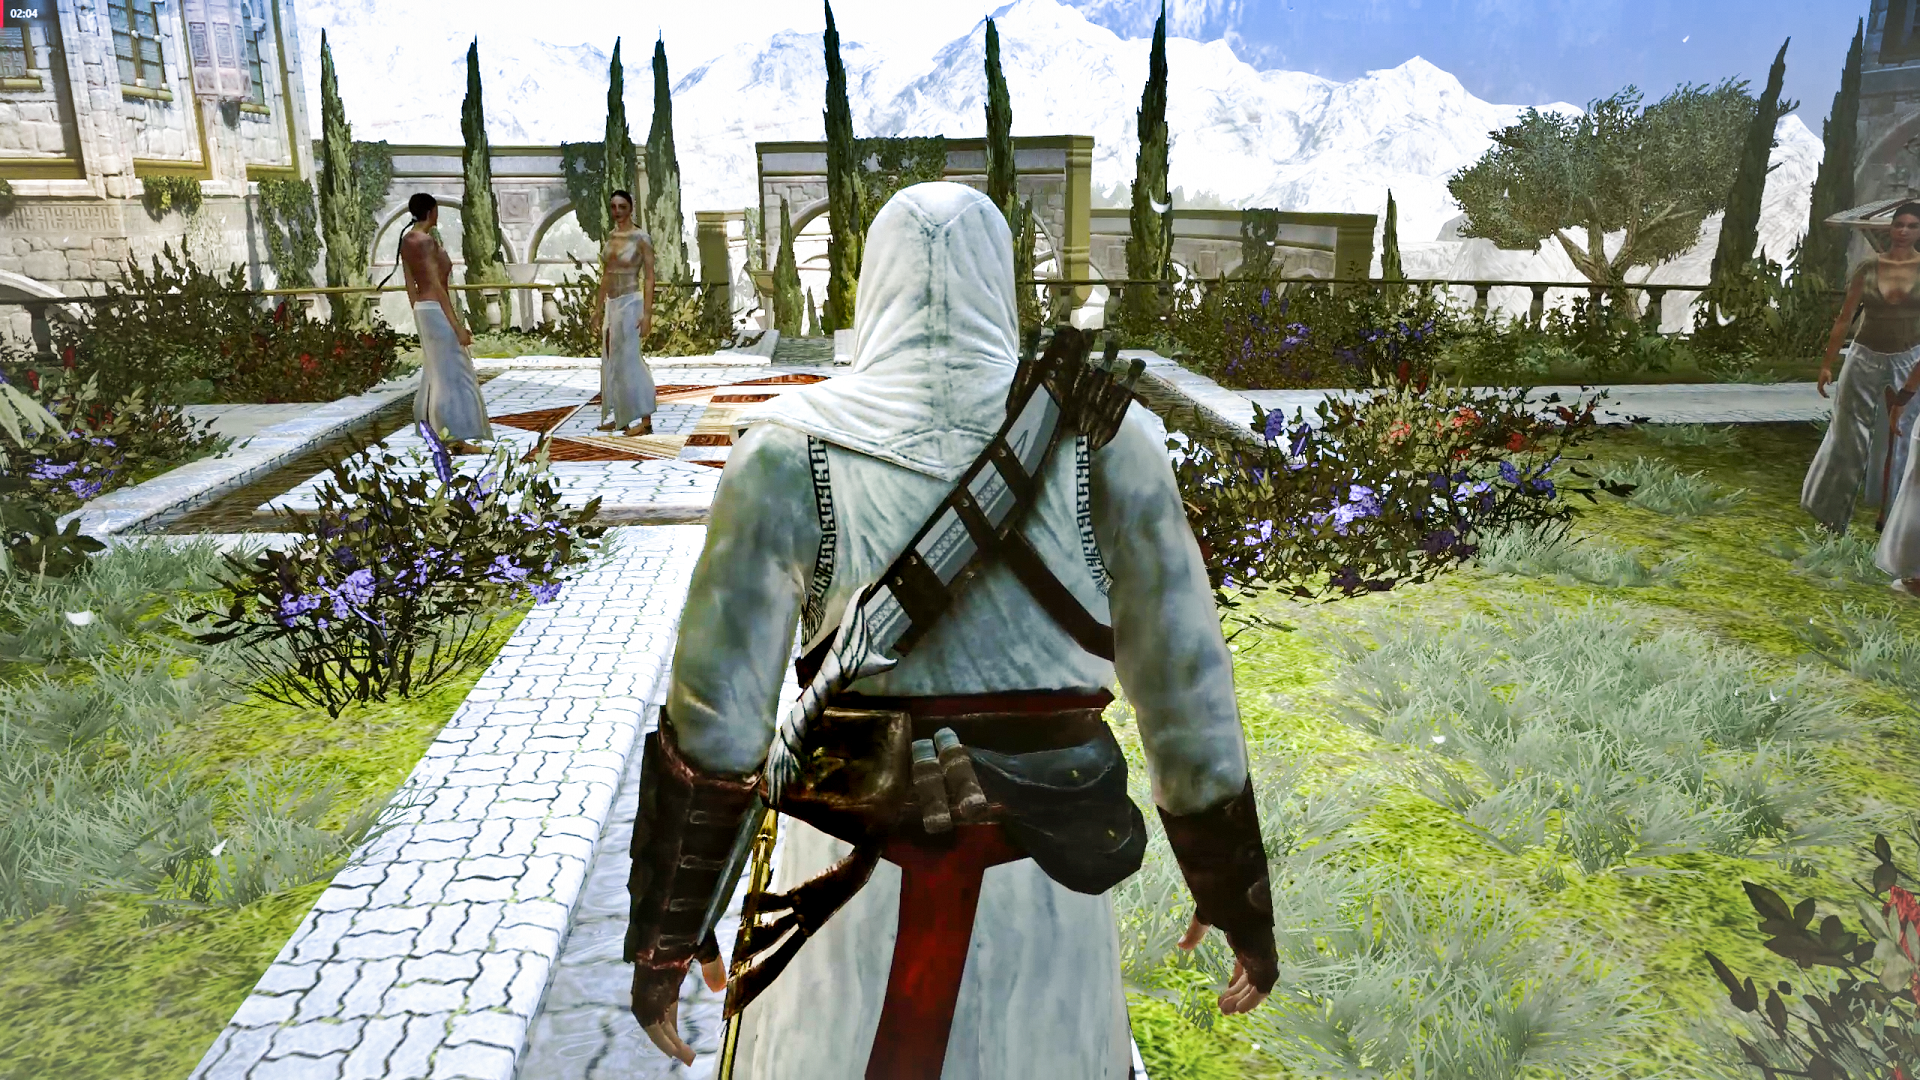 Assassin's Creed Remastered (Graphics Mod) Acre Gameplay - Combat &  Navigation 1080p 